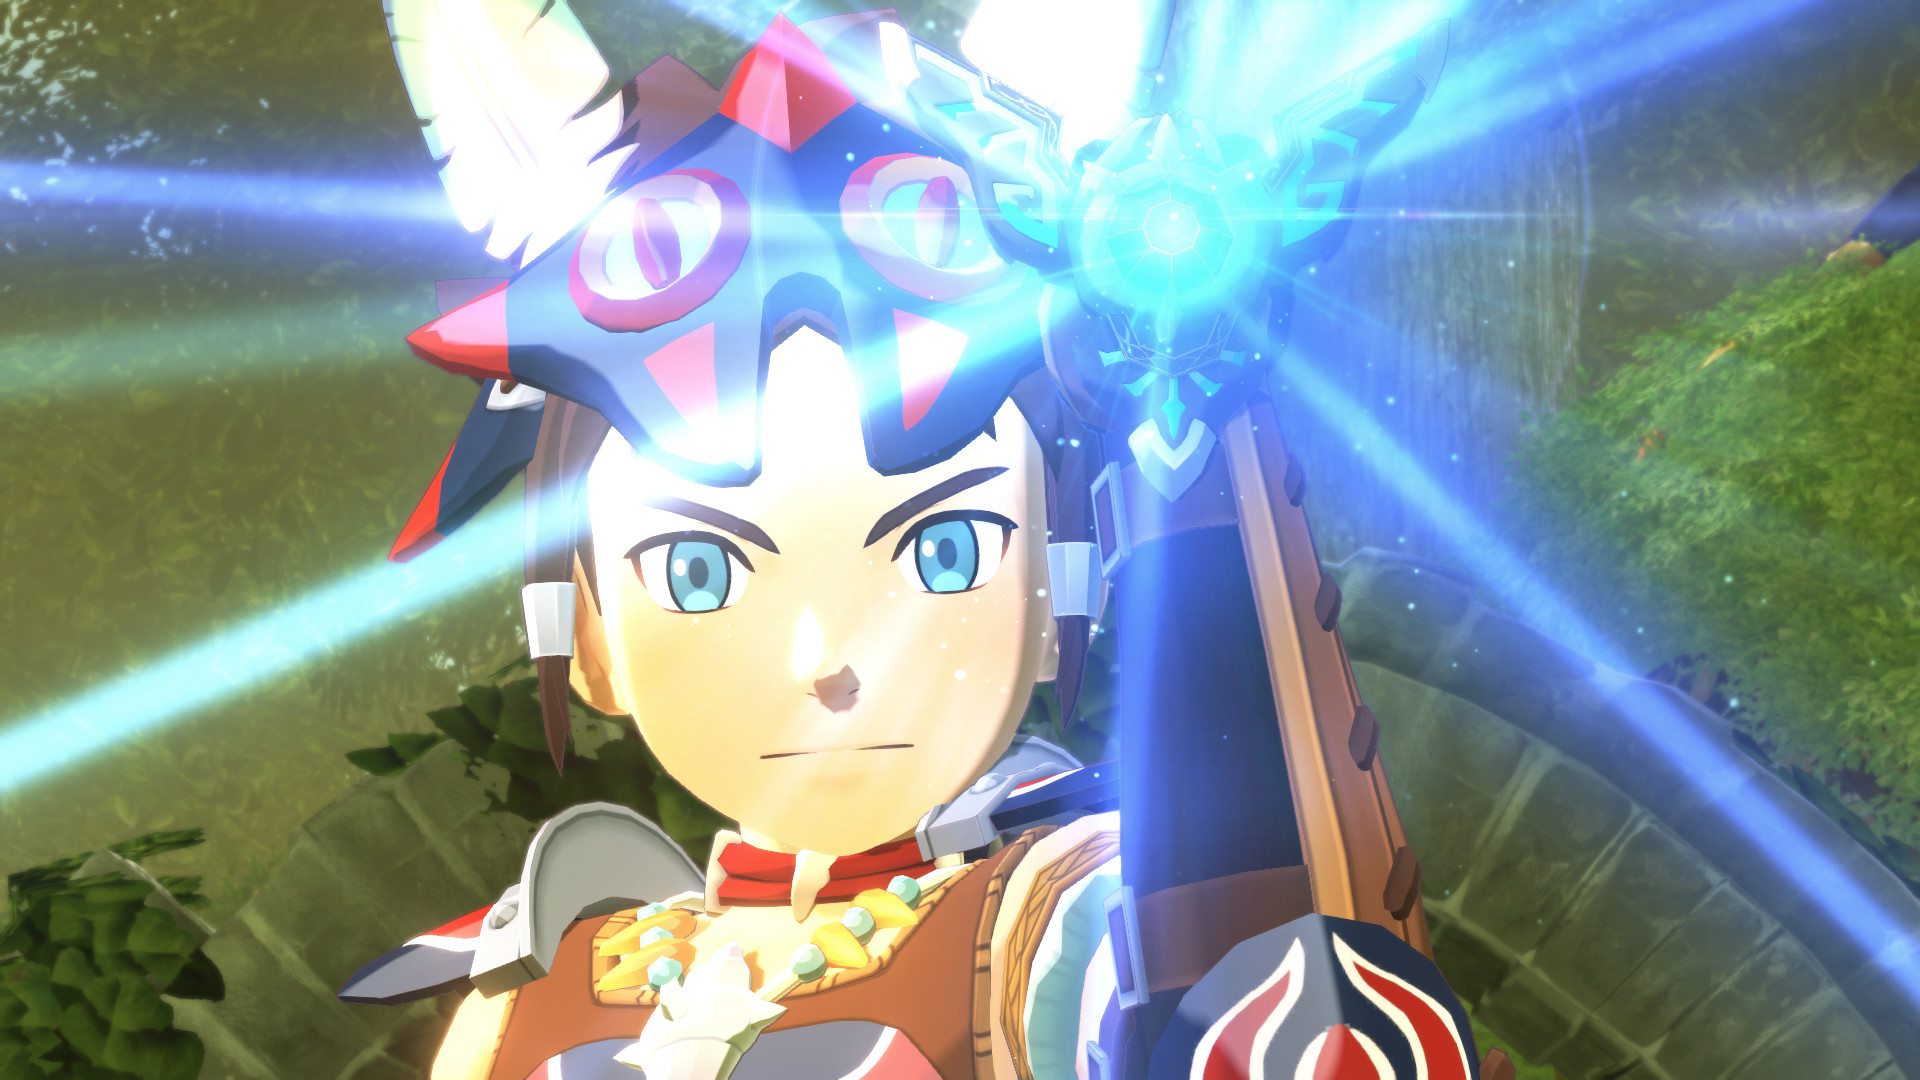 Rite of Channeling Guide - Monster Hunter Stories 2: Wings of Ruin